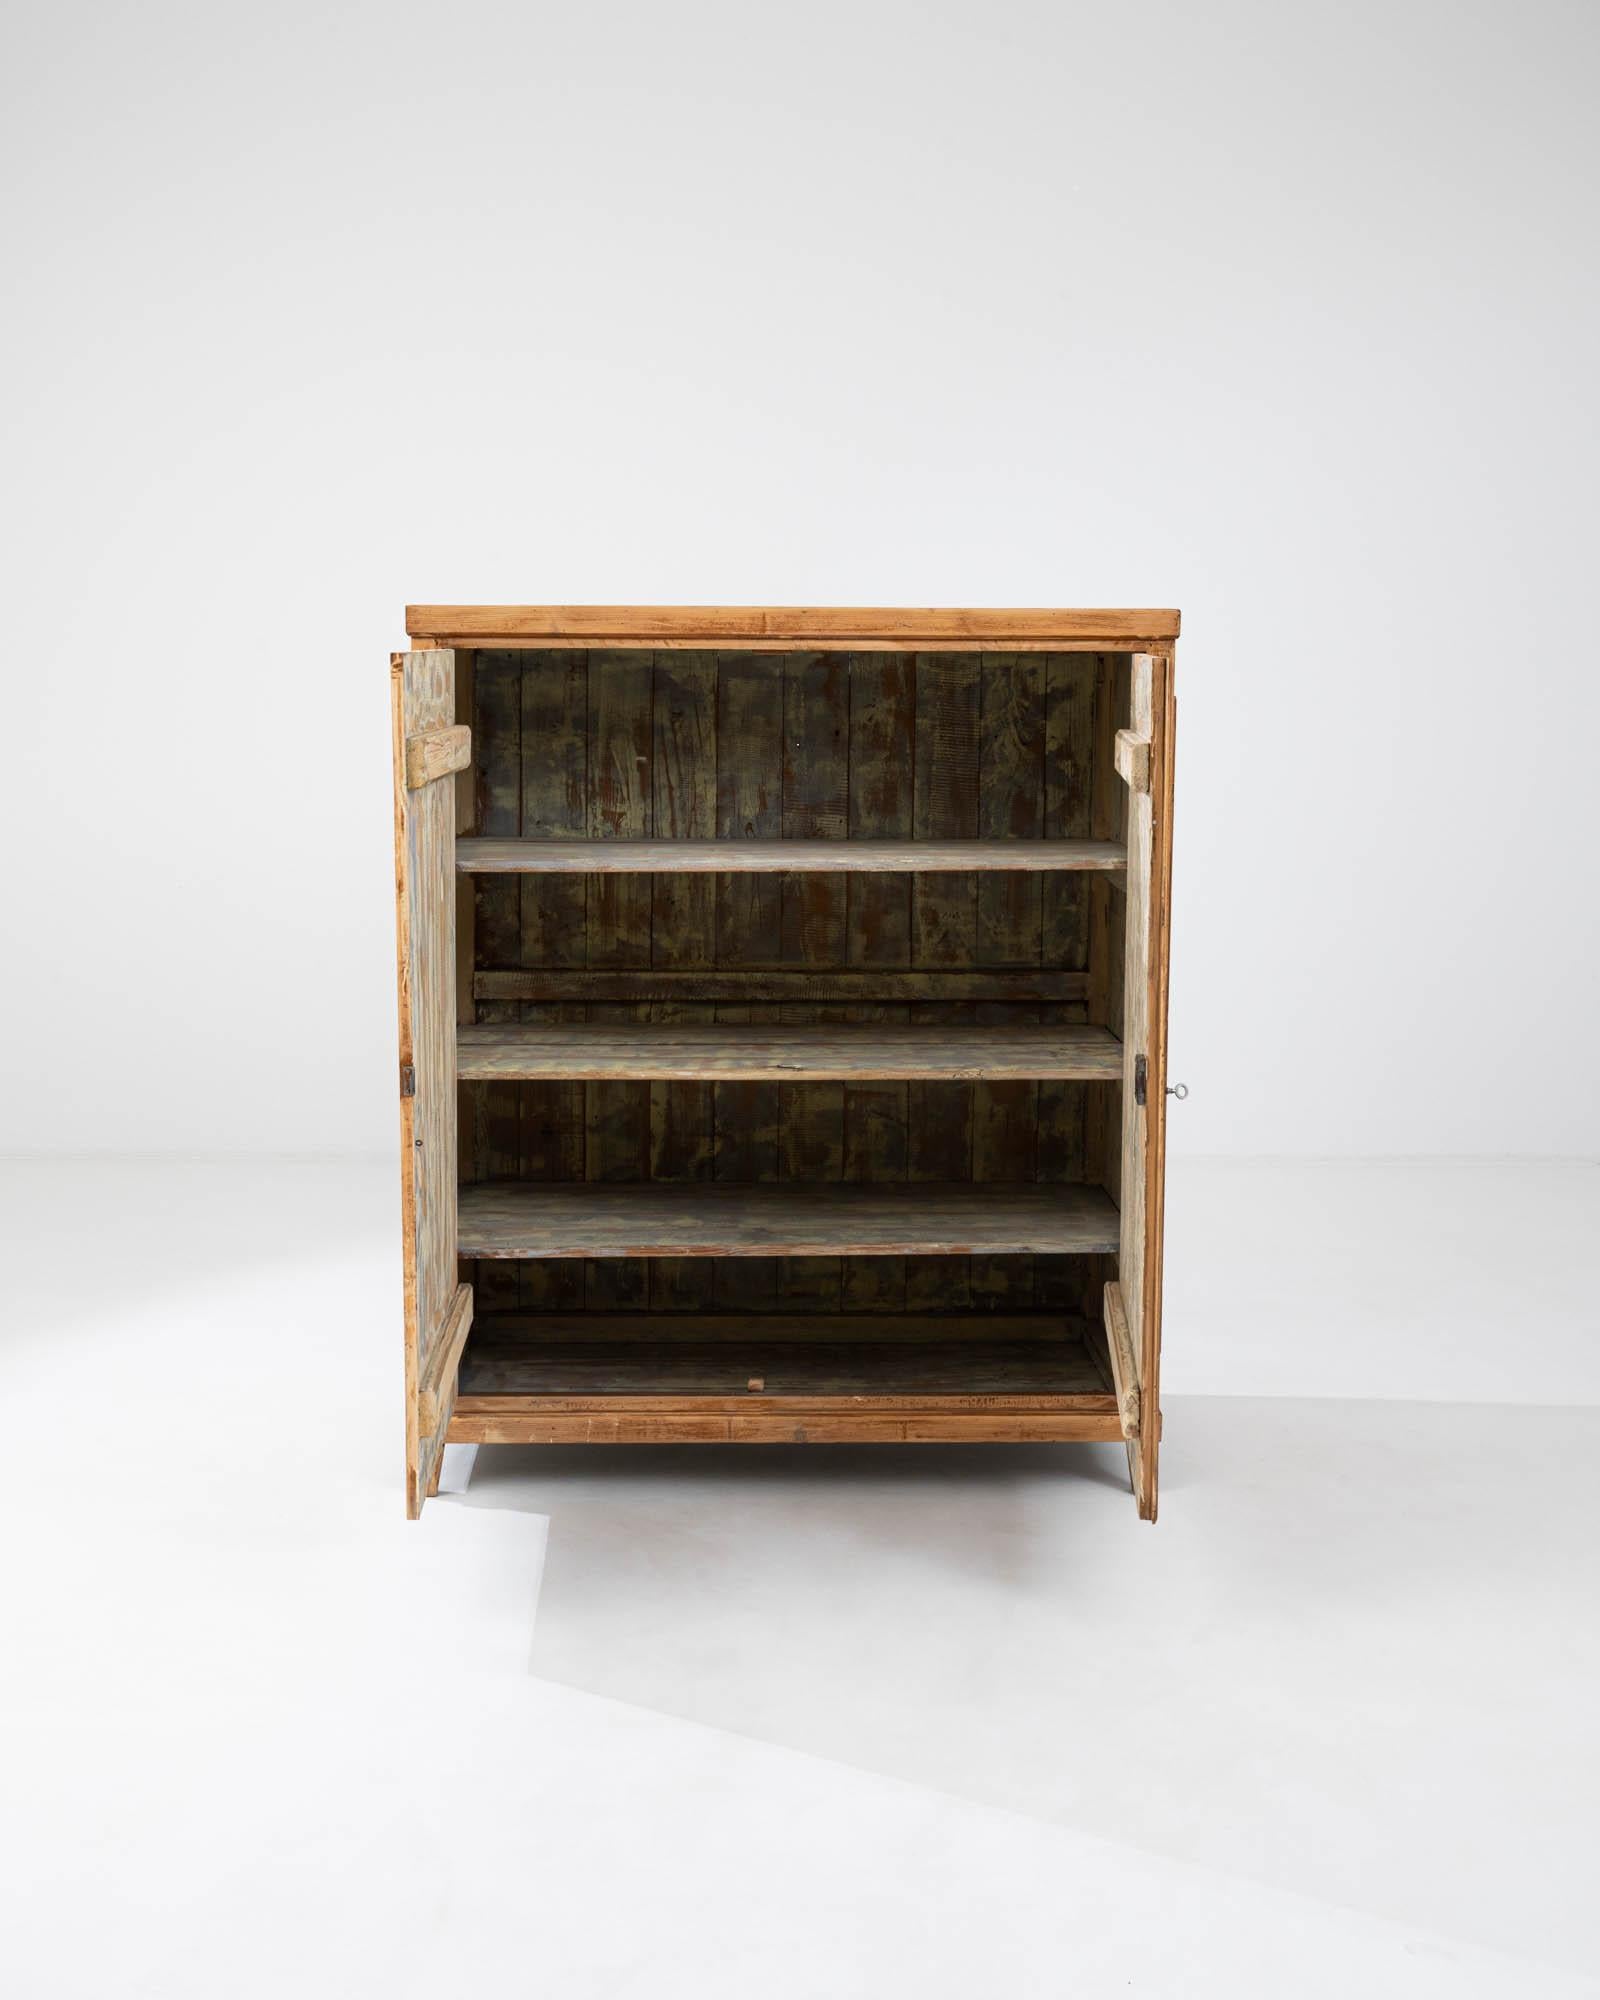 This early 1900s French Wooden Buffet is a testament to the timeless allure of natural wood and traditional craftsmanship. The buffet's robust silhouette, constructed from richly patinated pine, exudes a sense of rustic elegance and durability. Each